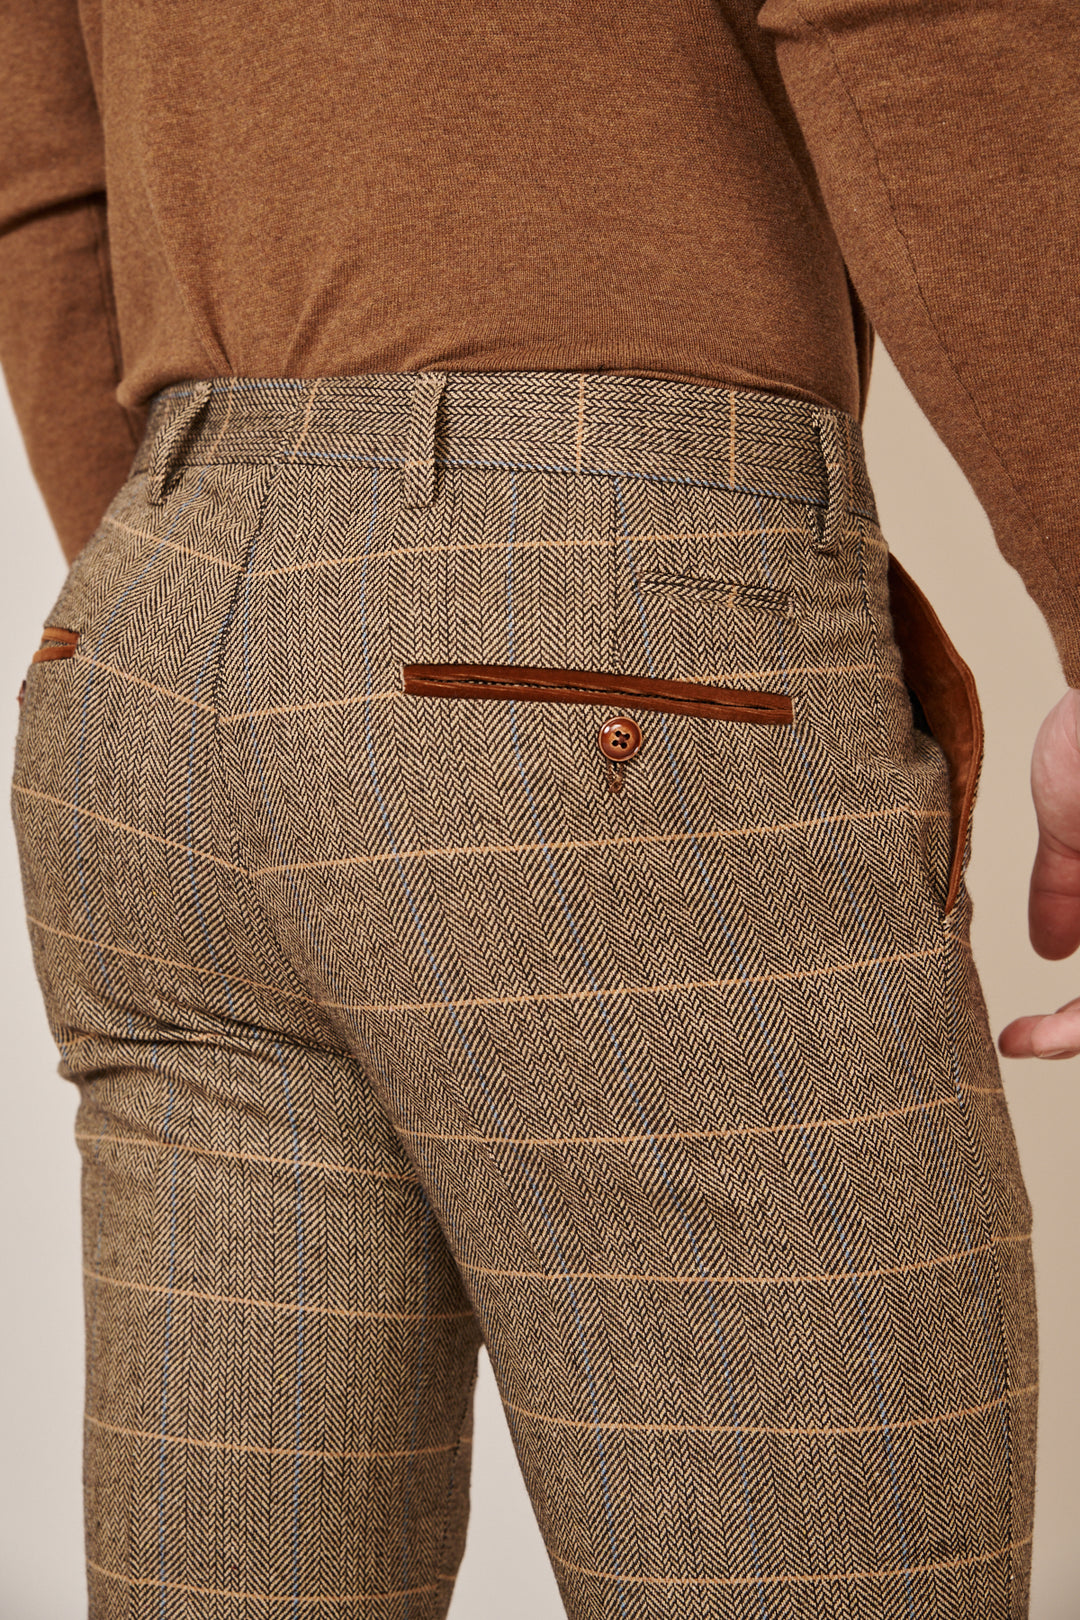 DX7 - Tan Tweed Check Two Piece Suit